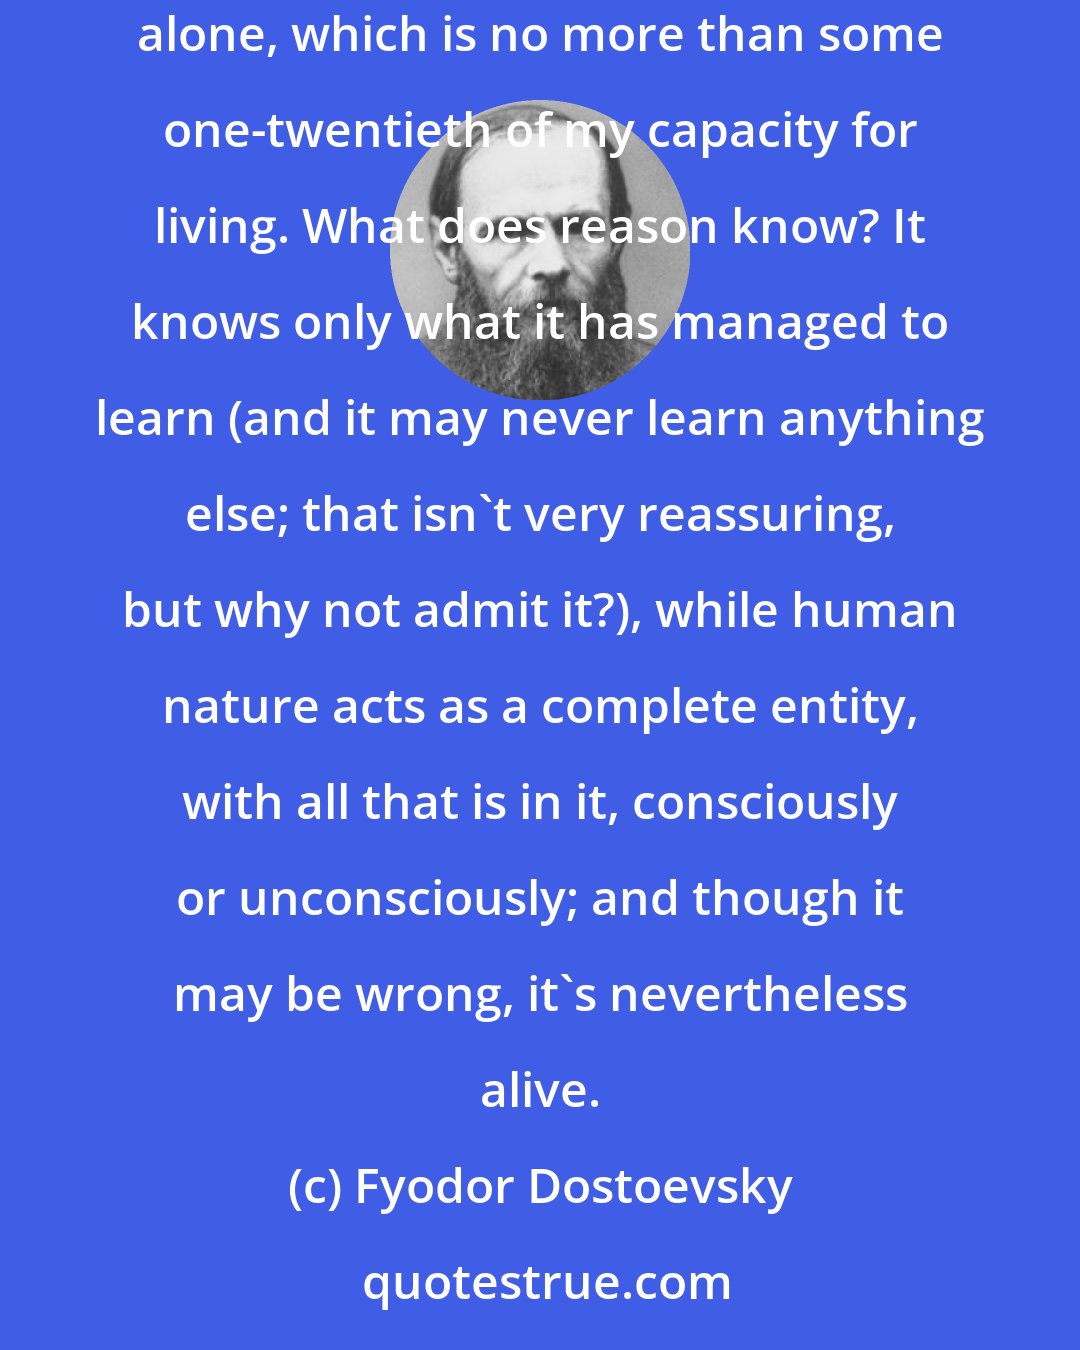 Fyodor Dostoevsky: After all, I quite naturally want to live in order to fulfill my whole capacity for living, and not in order to fulfill my reasoning capacity alone, which is no more than some one-twentieth of my capacity for living. What does reason know? It knows only what it has managed to learn (and it may never learn anything else; that isn't very reassuring, but why not admit it?), while human nature acts as a complete entity, with all that is in it, consciously or unconsciously; and though it may be wrong, it's nevertheless alive.